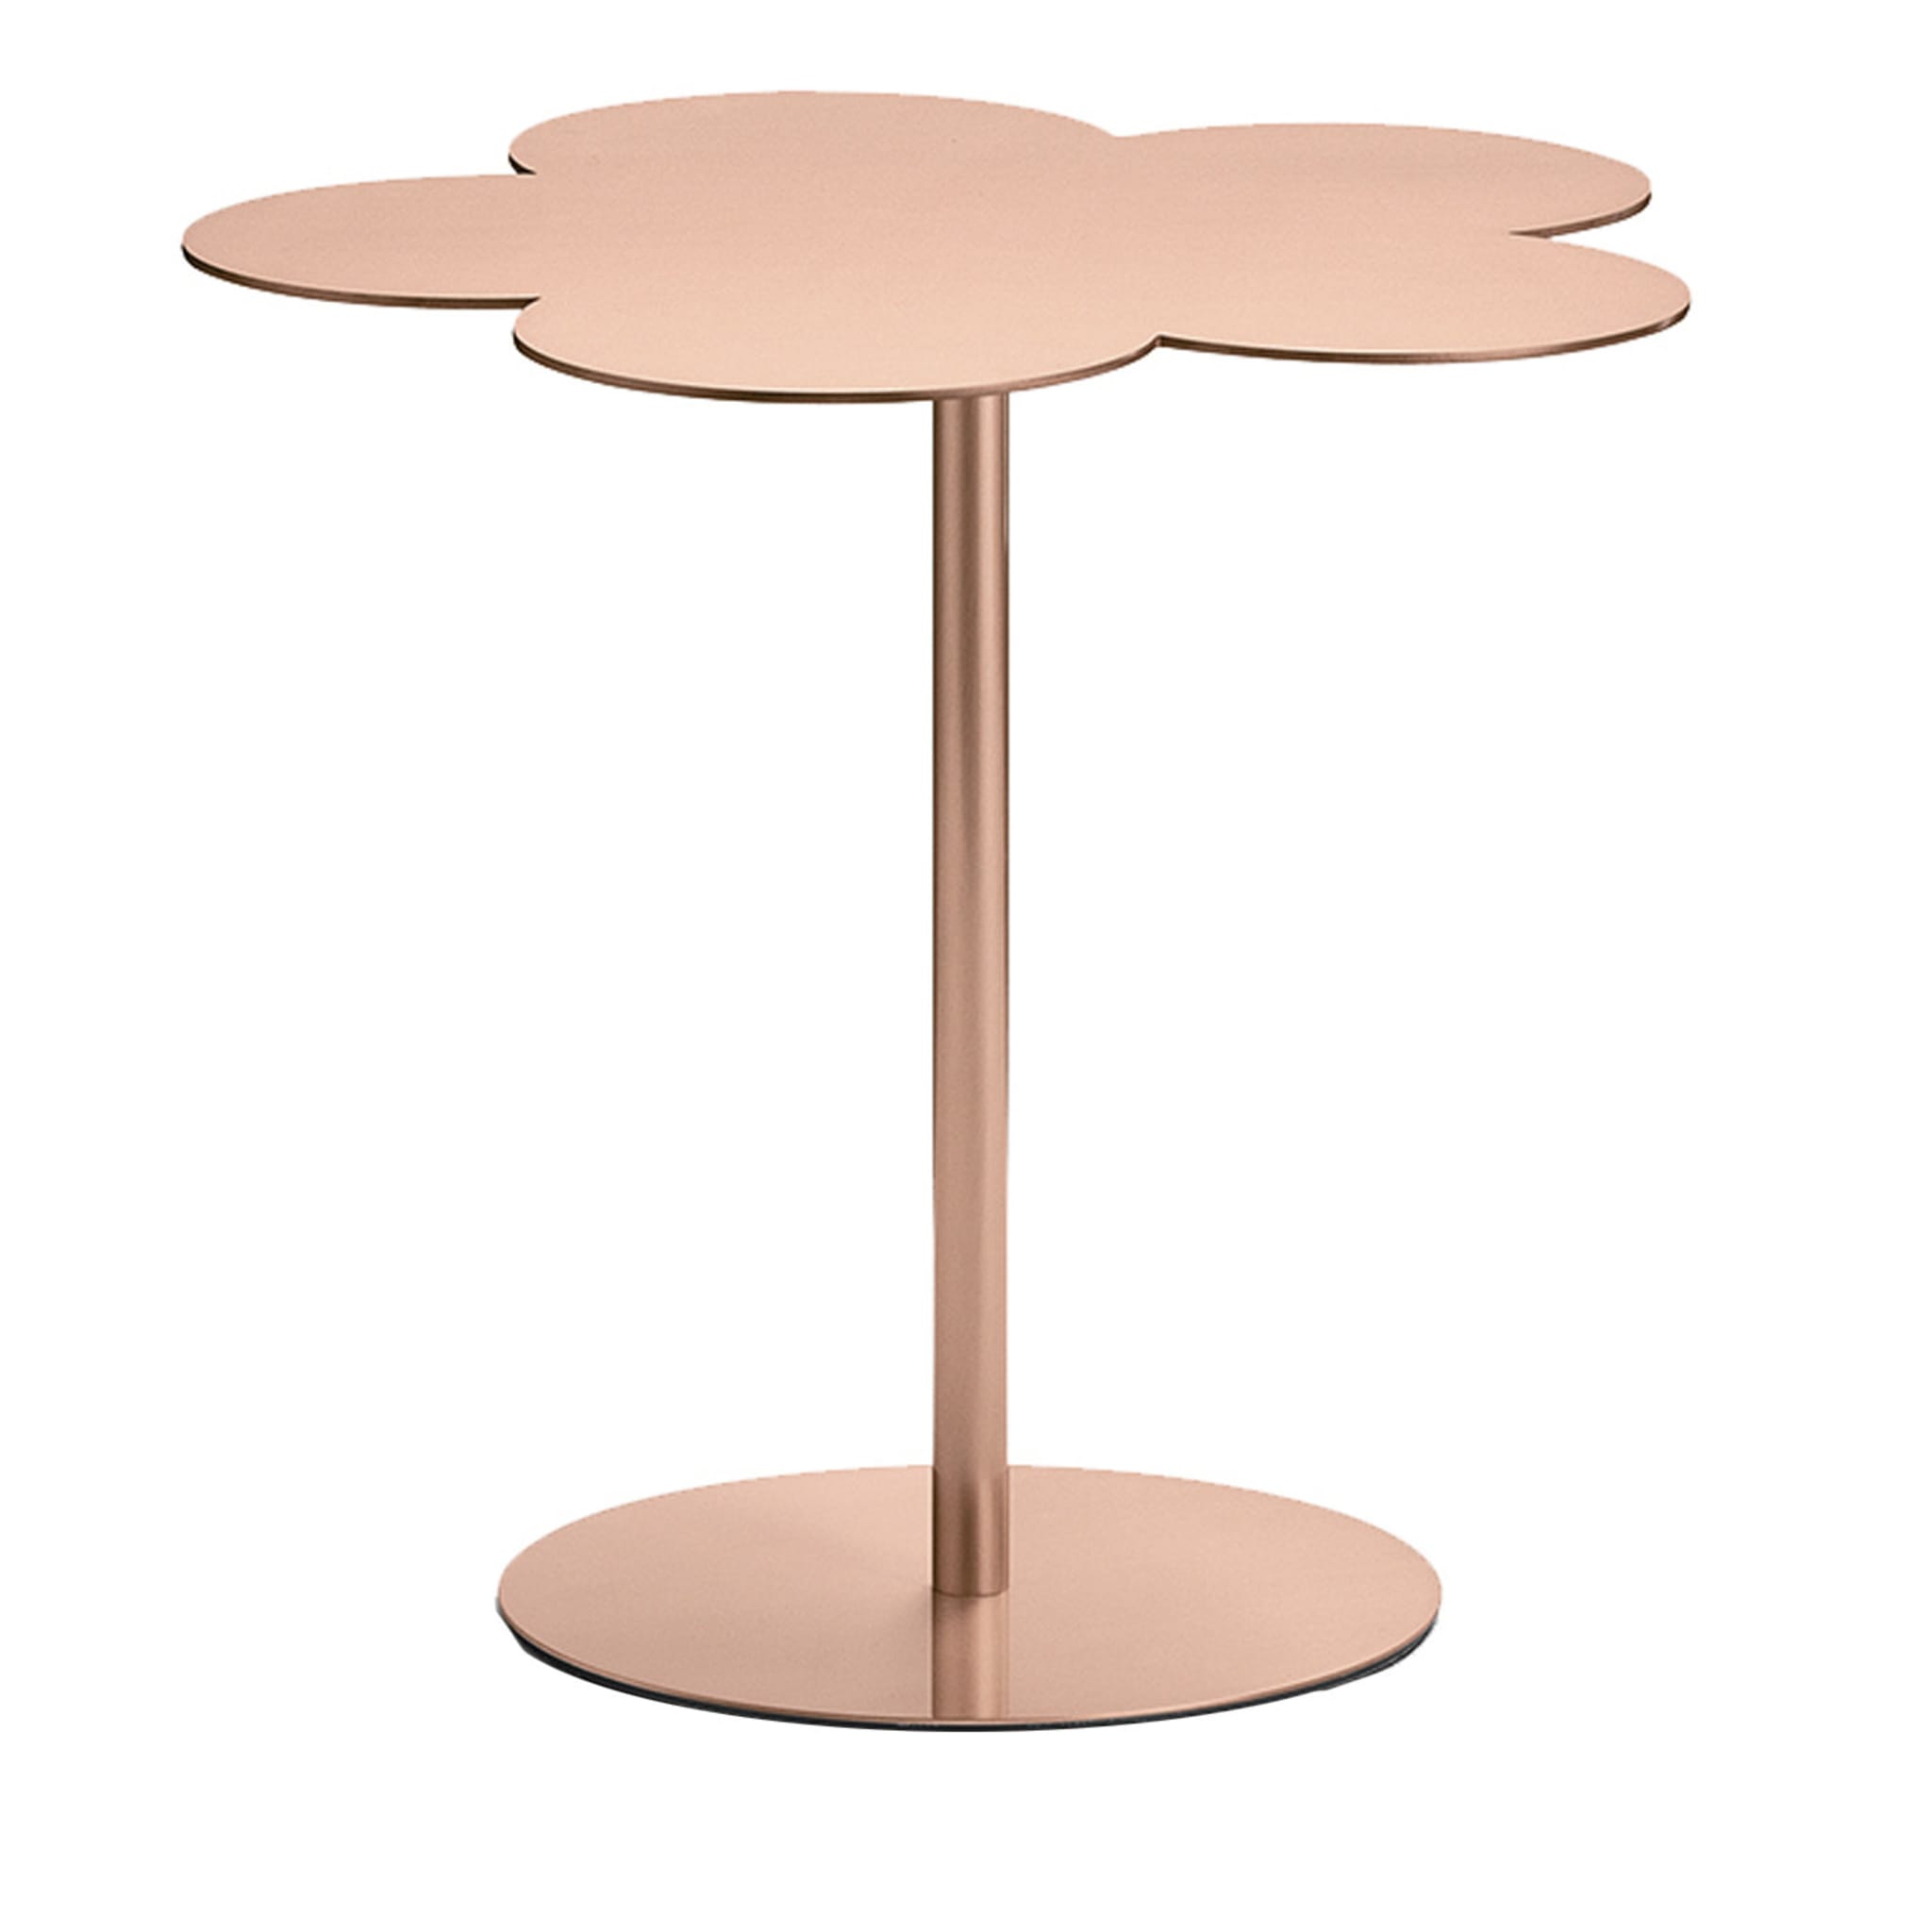 Flowers Copper Small Side Table By Stefano Giovannoni - Main view